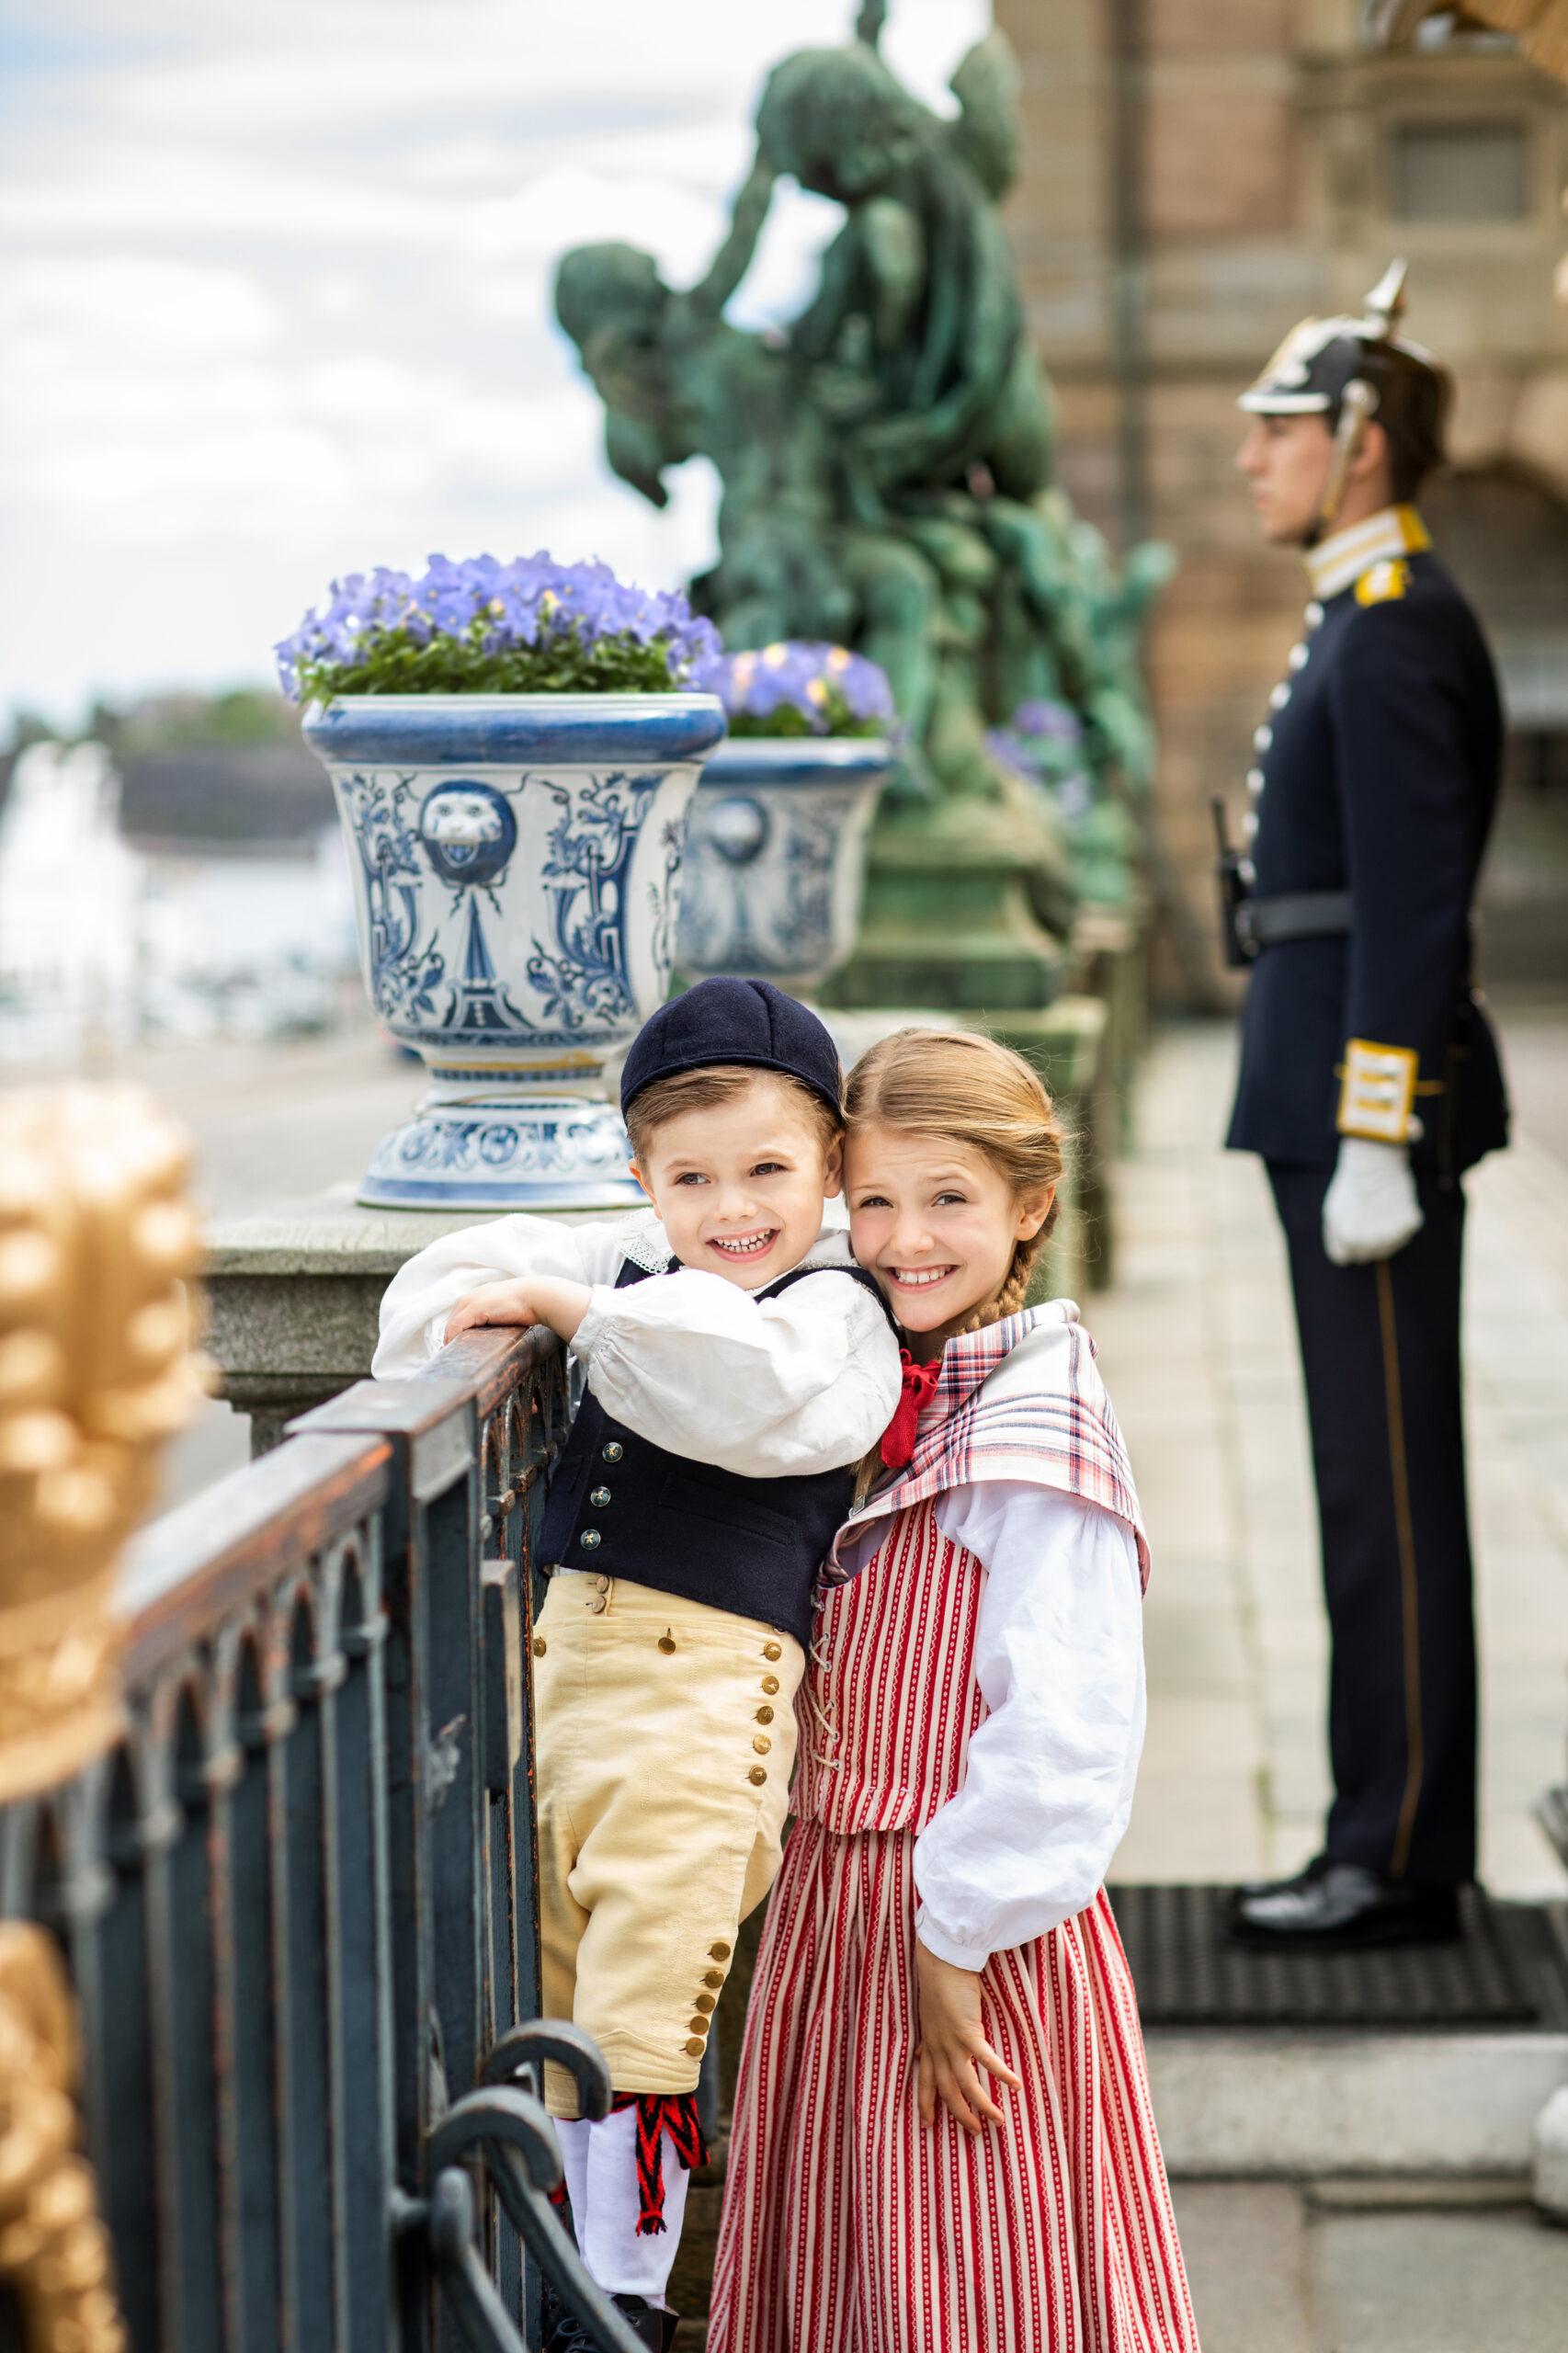 Princess Estelle and Prince Oscar dressed up and standing by a railing, a uniformed guard in the background.